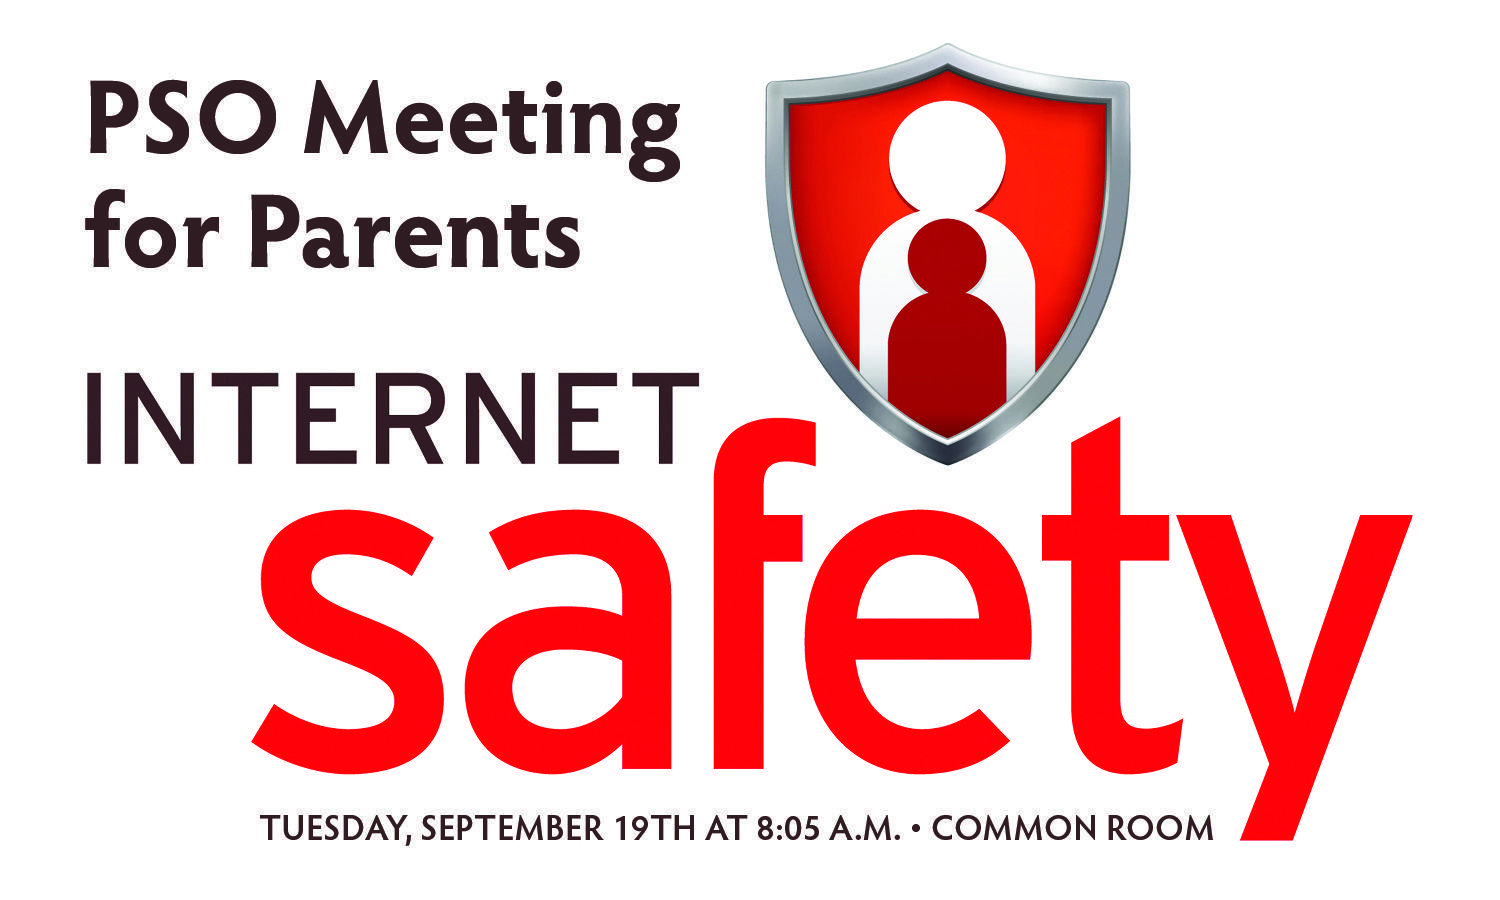 Internet Safety Logo - Learn About Internet Safety for Kids at the PSO Meeting on September